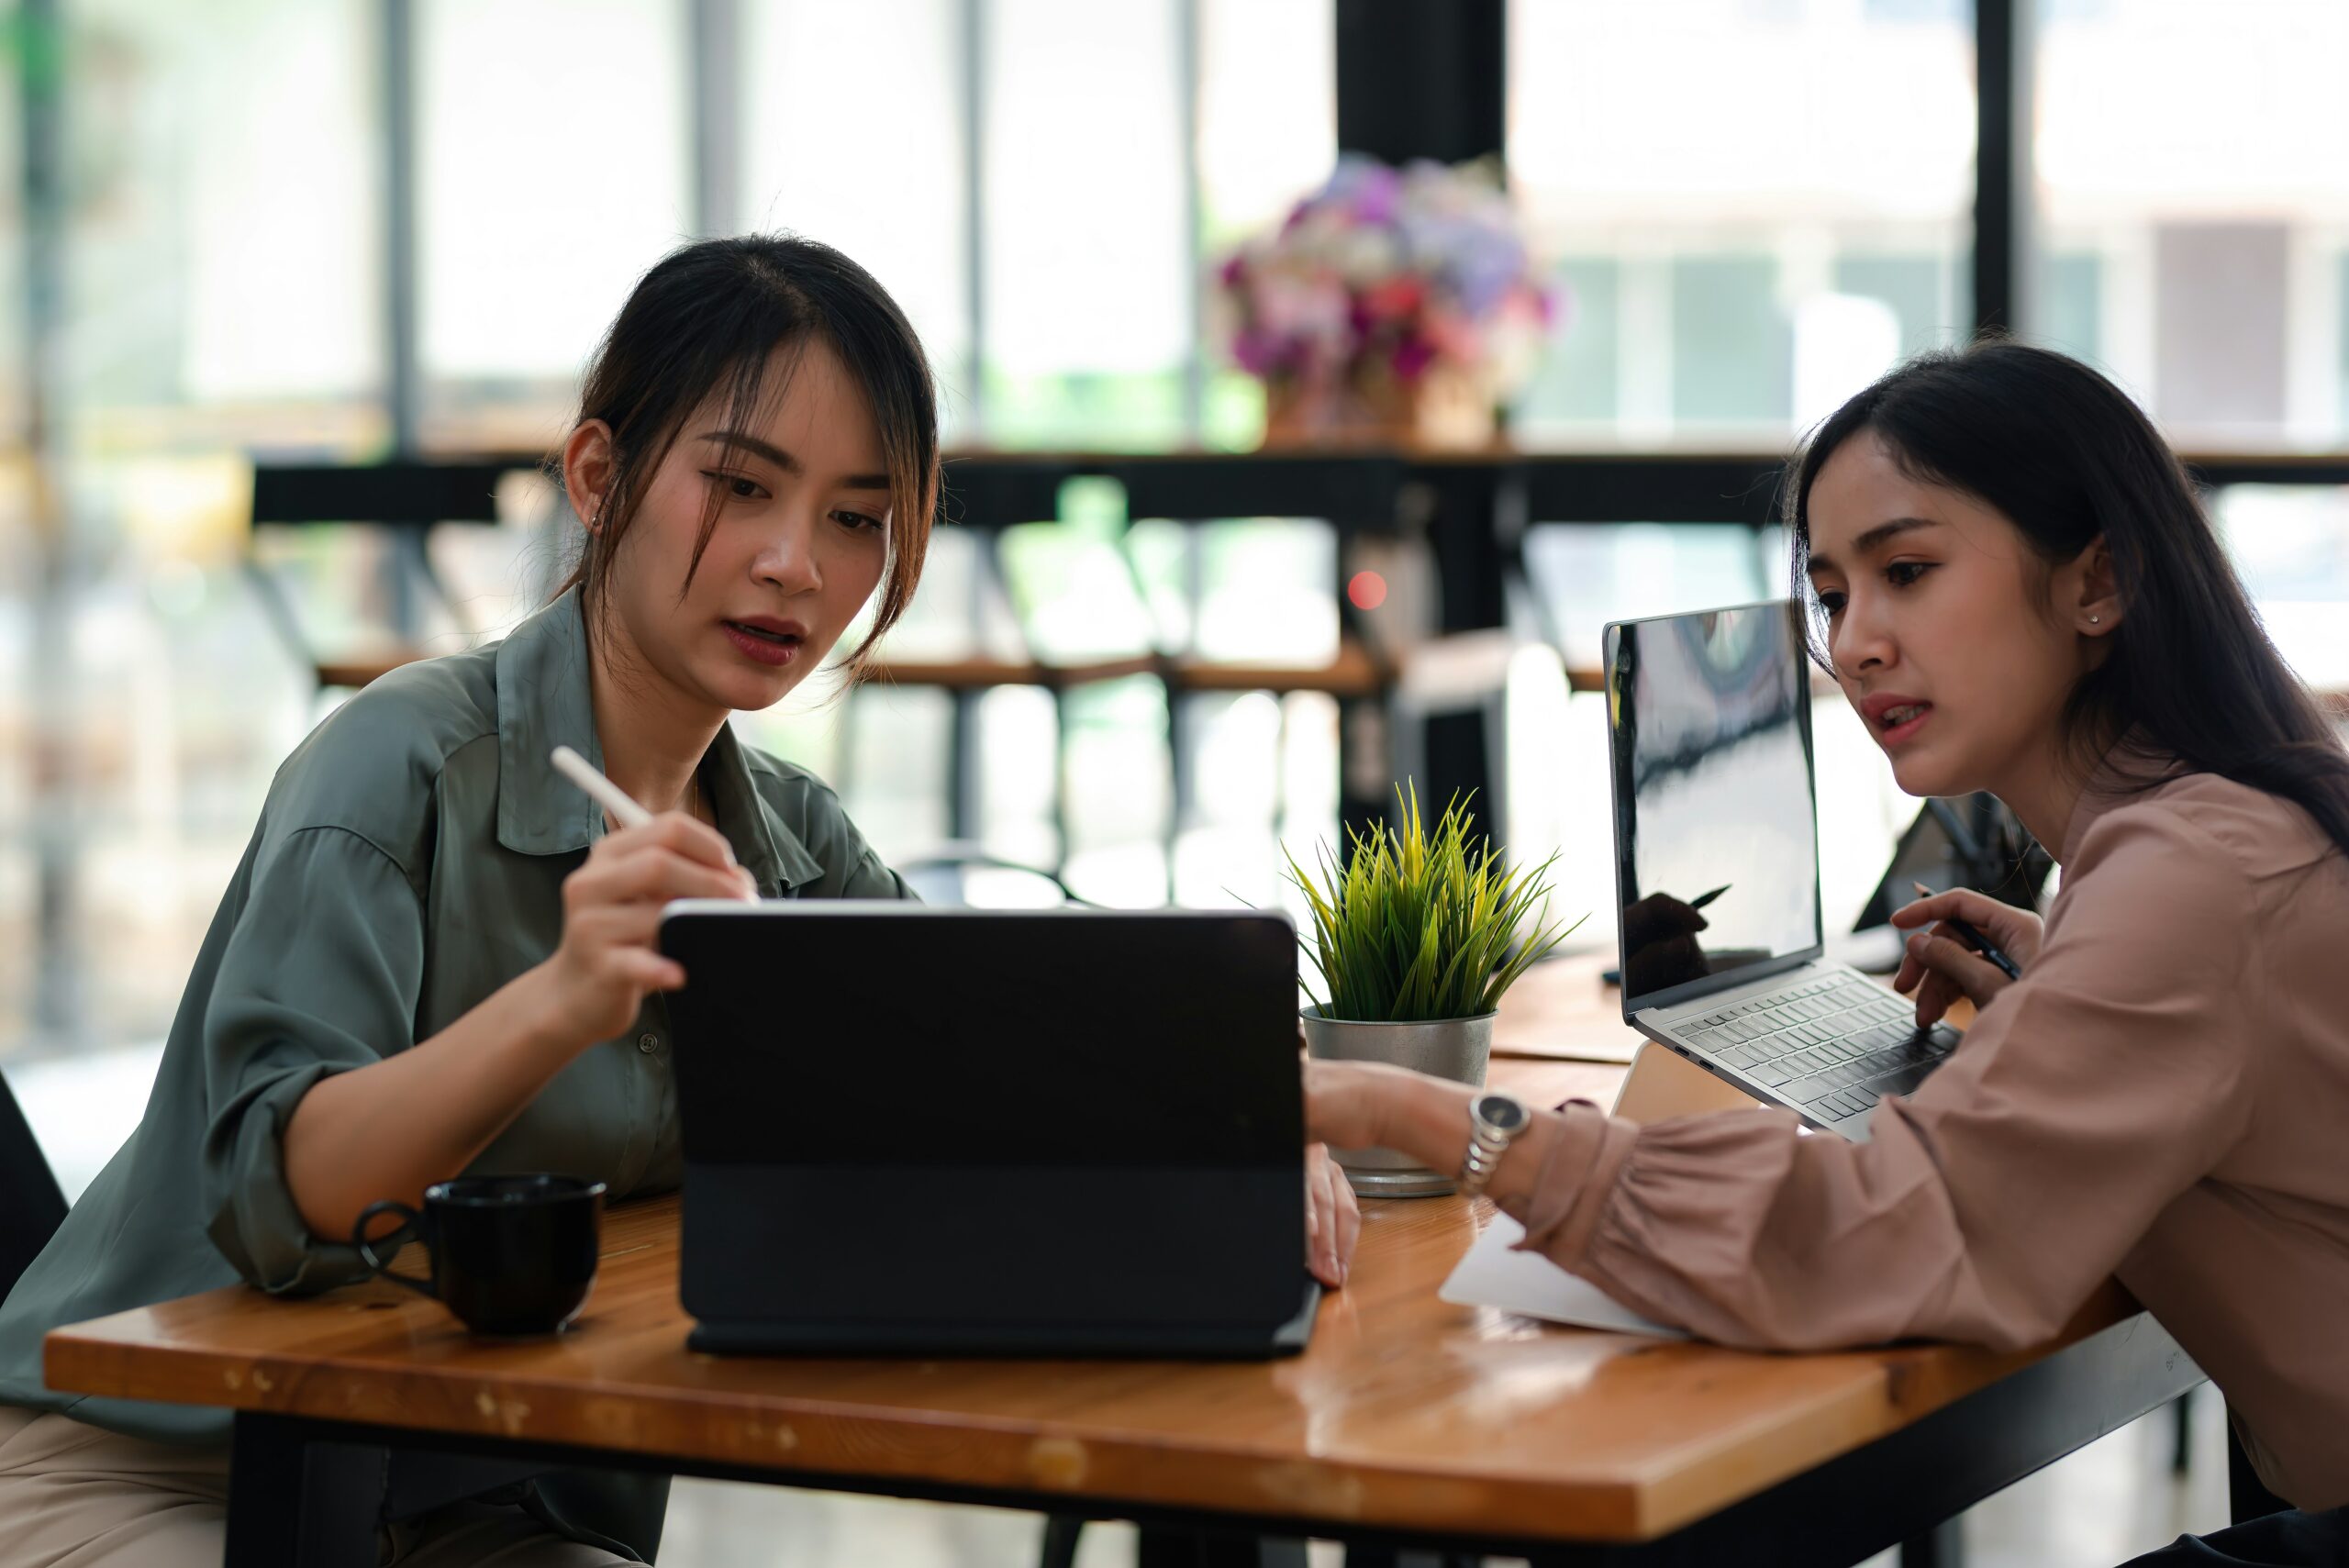 Two women engaged in a discussion on IT services for business while working on tablets at a table in a modern office setting.